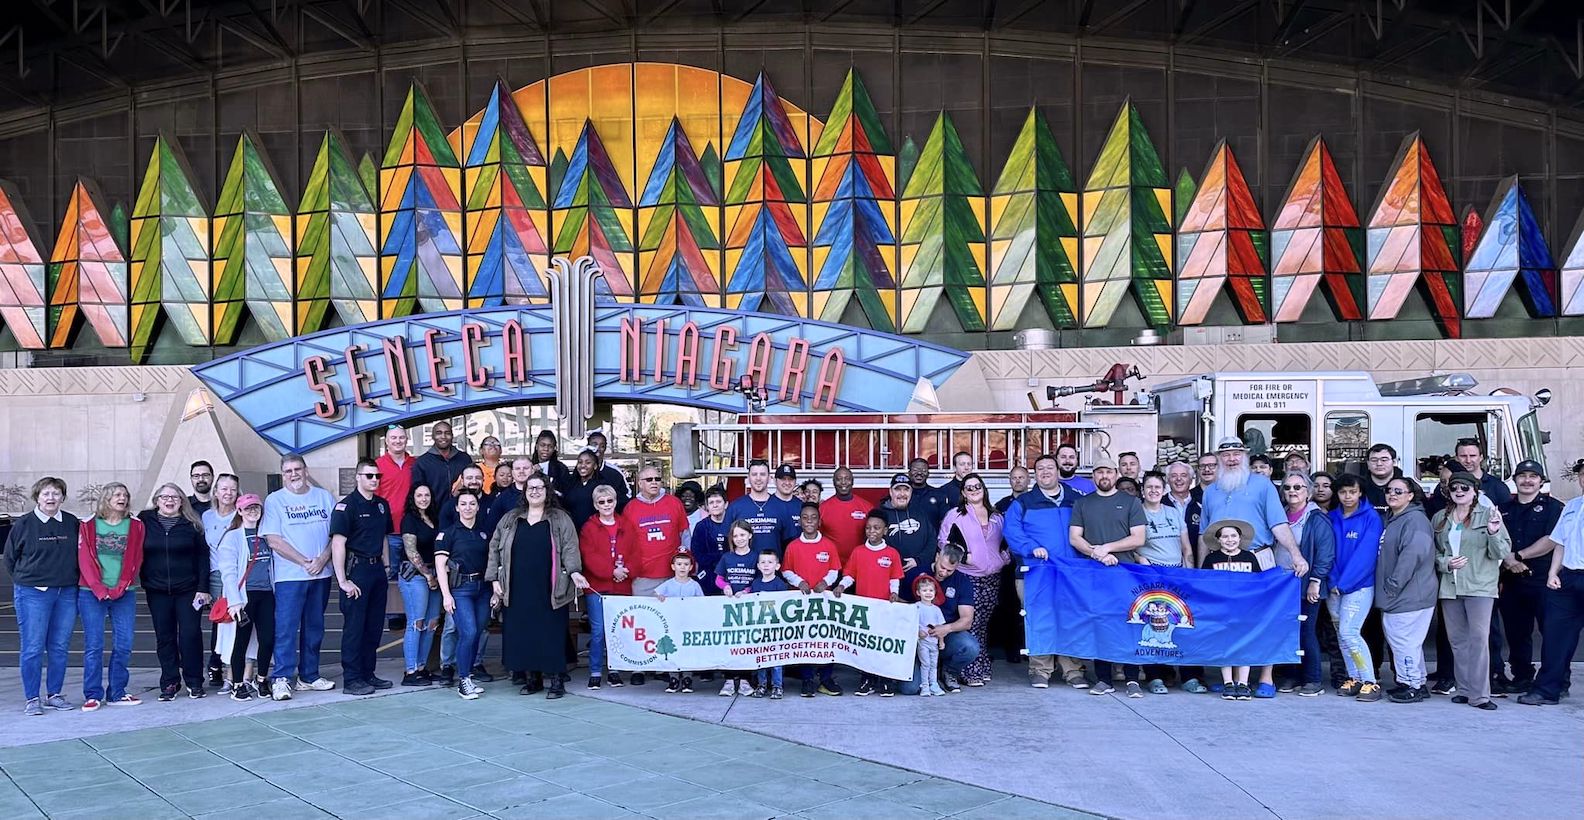 Niagara Beautification Commission volunteers gather for annual group photo in front of Seneca Niagara Resort & Casino before going into the city to clean up. (Submitted)